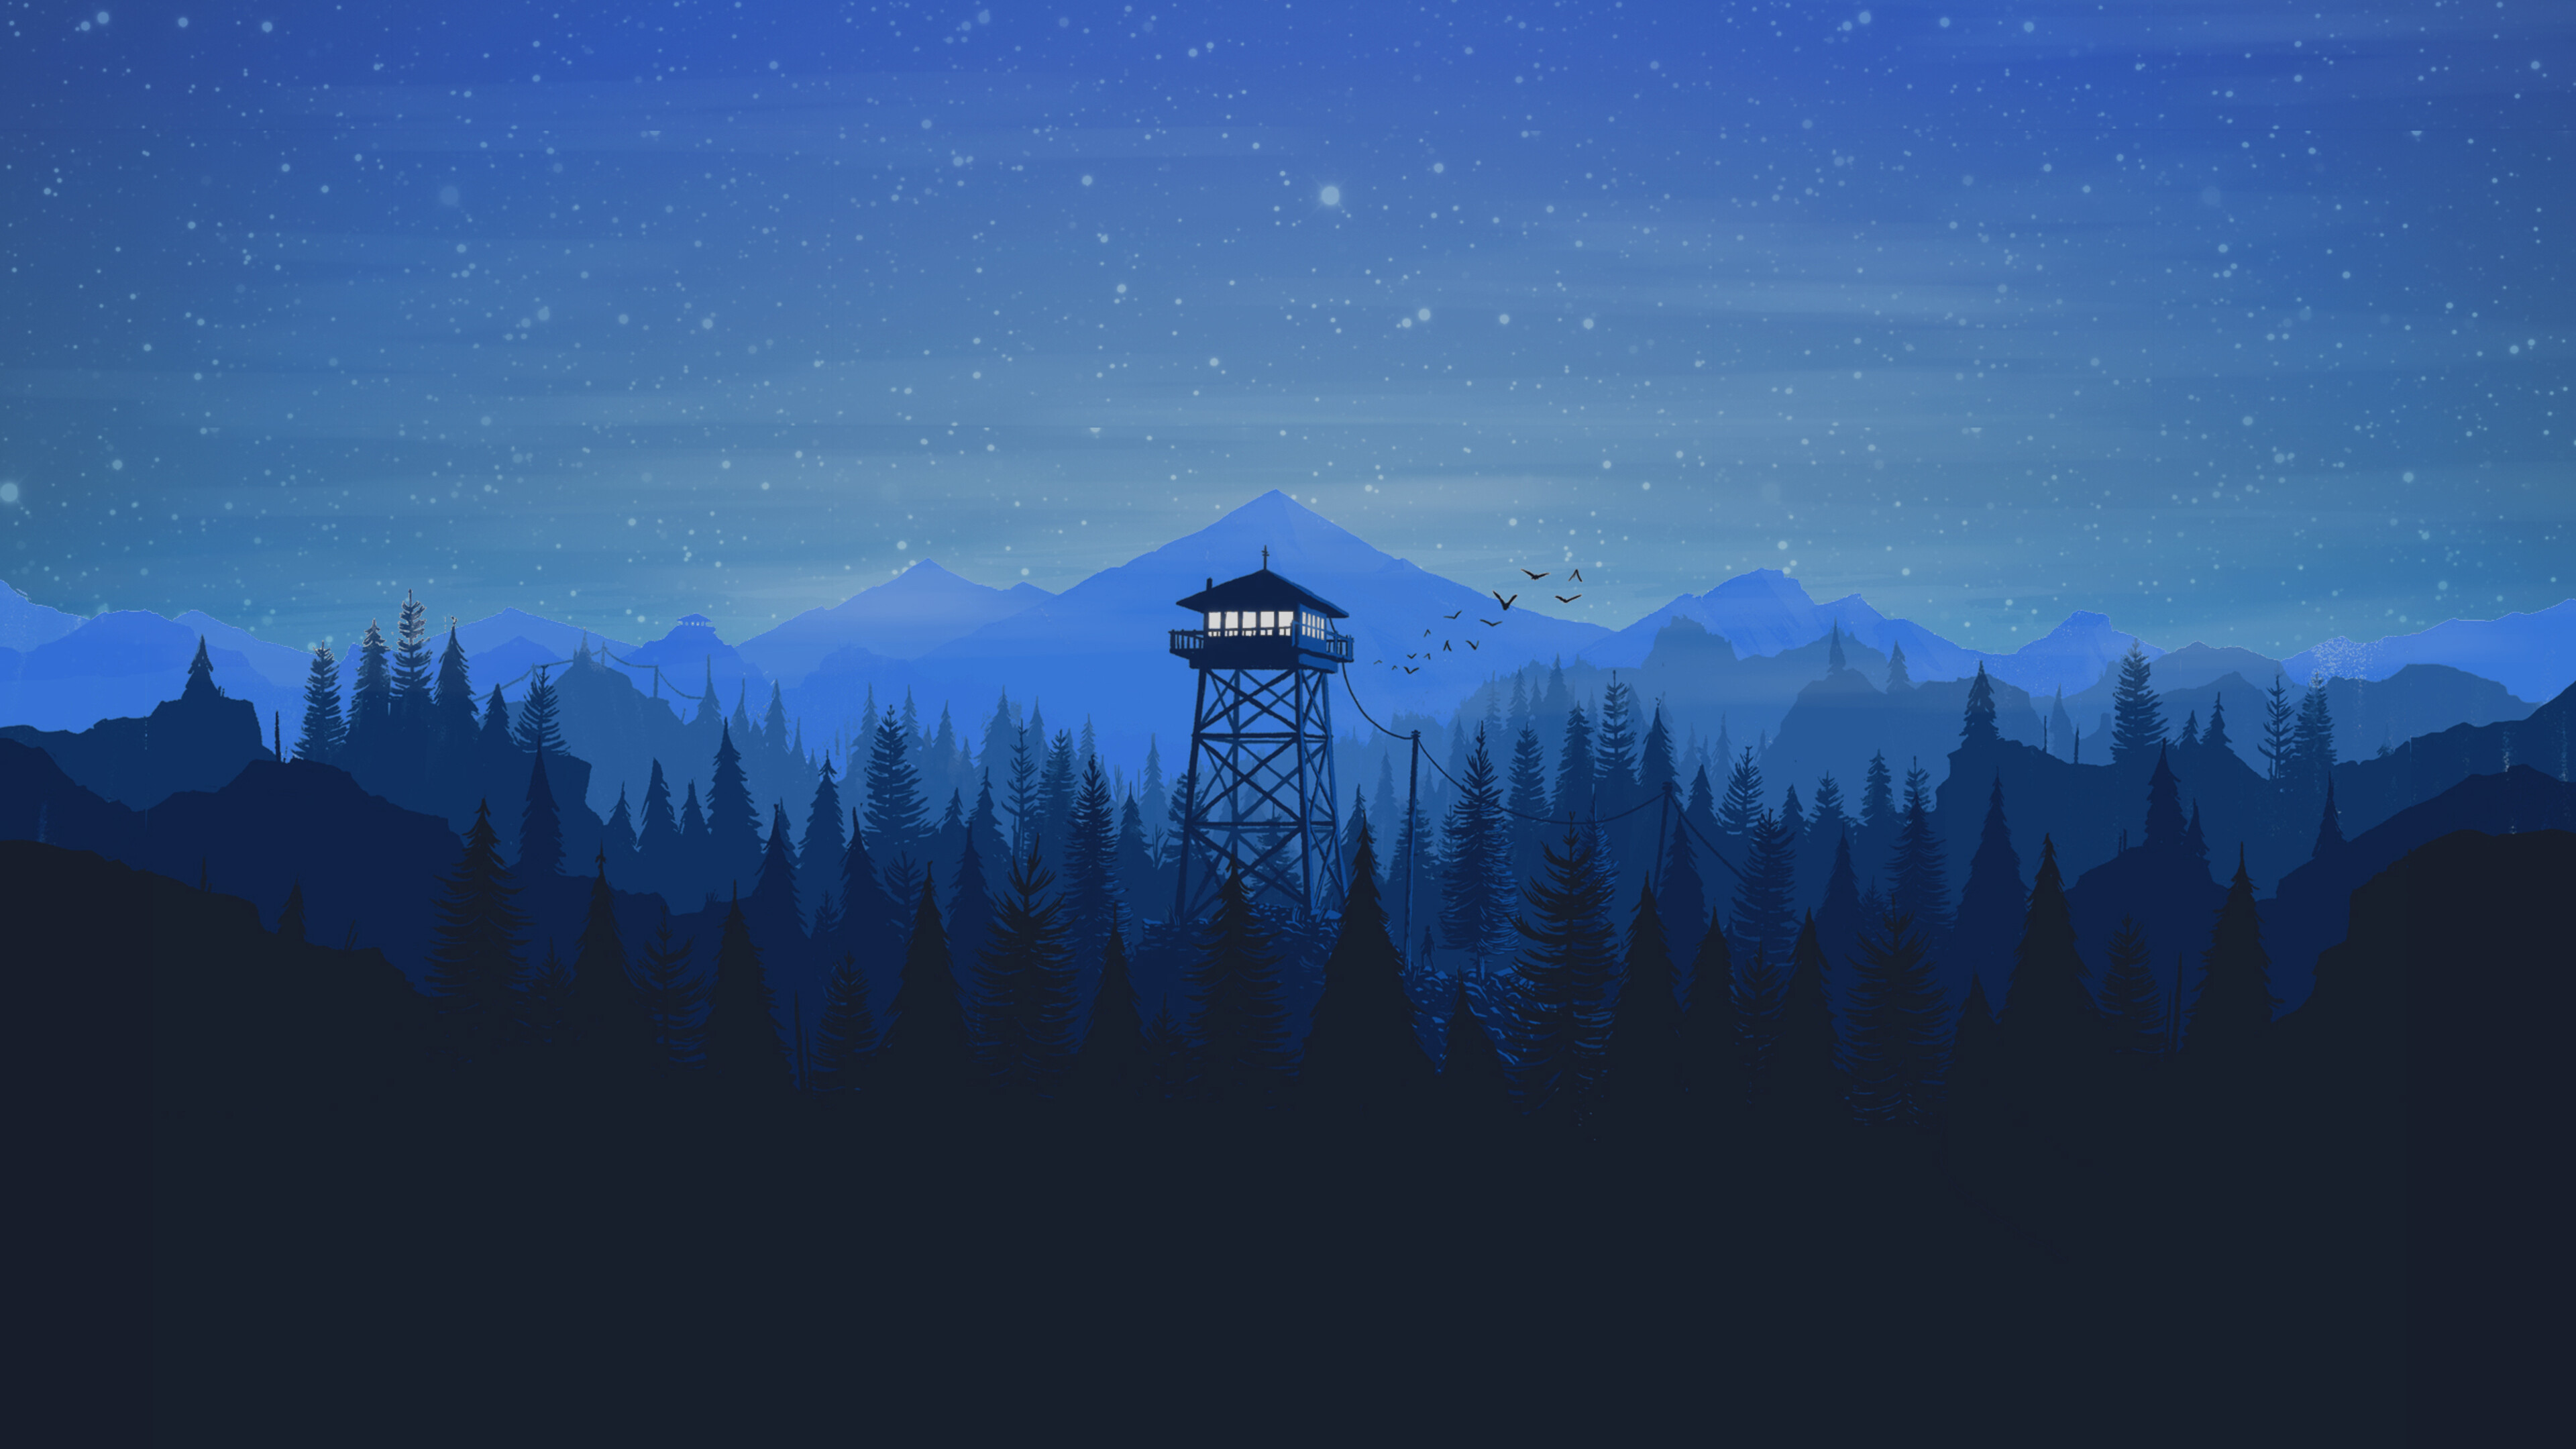 Firewatch: An adventure game developed by Campo Santo. 3840x2160 4K Wallpaper.